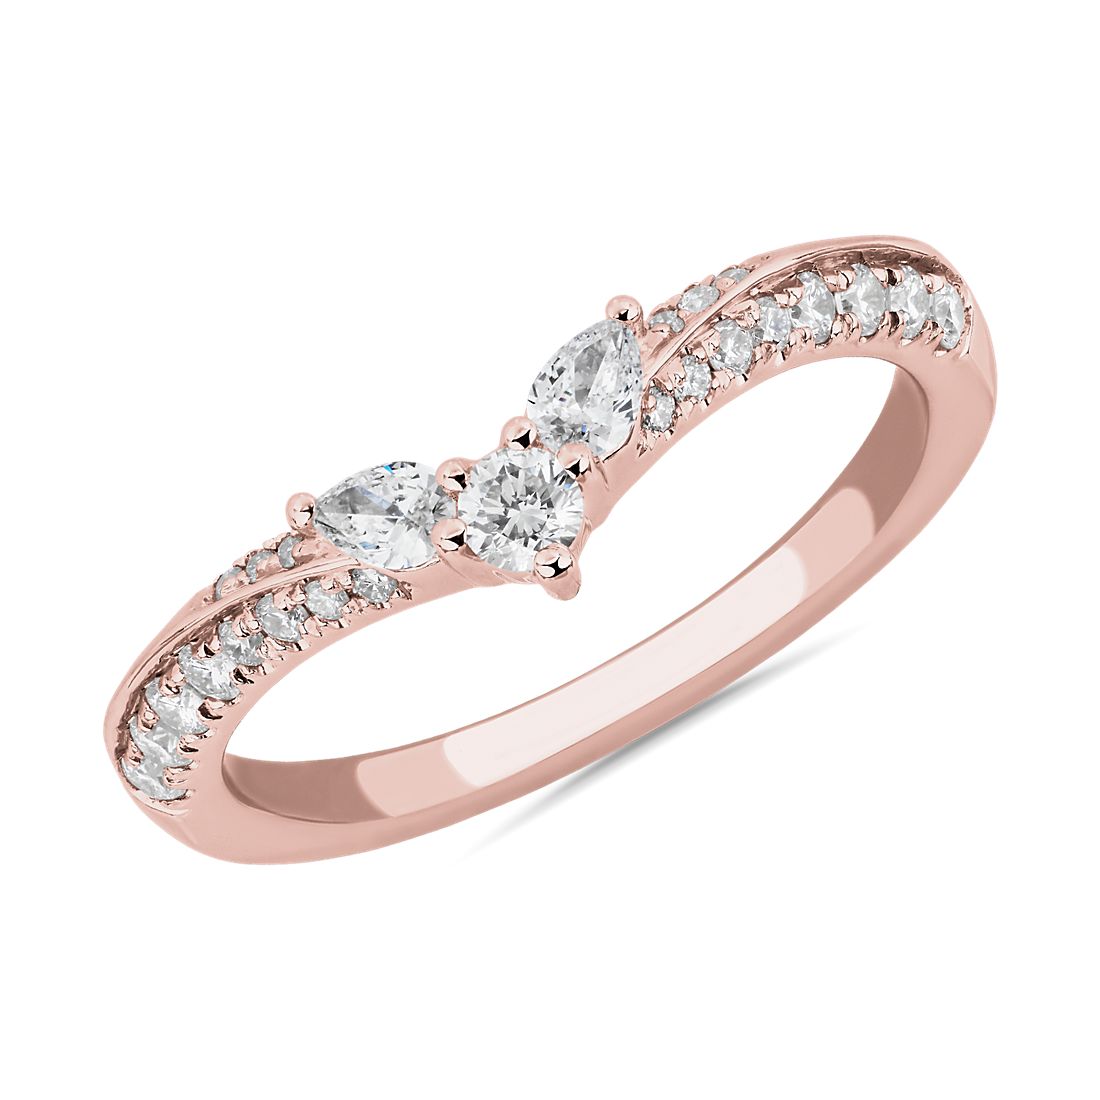 Romantic Winged Pear Diamond Pavé Ring in 18k Rose Gold (0.30 ct. tw.)